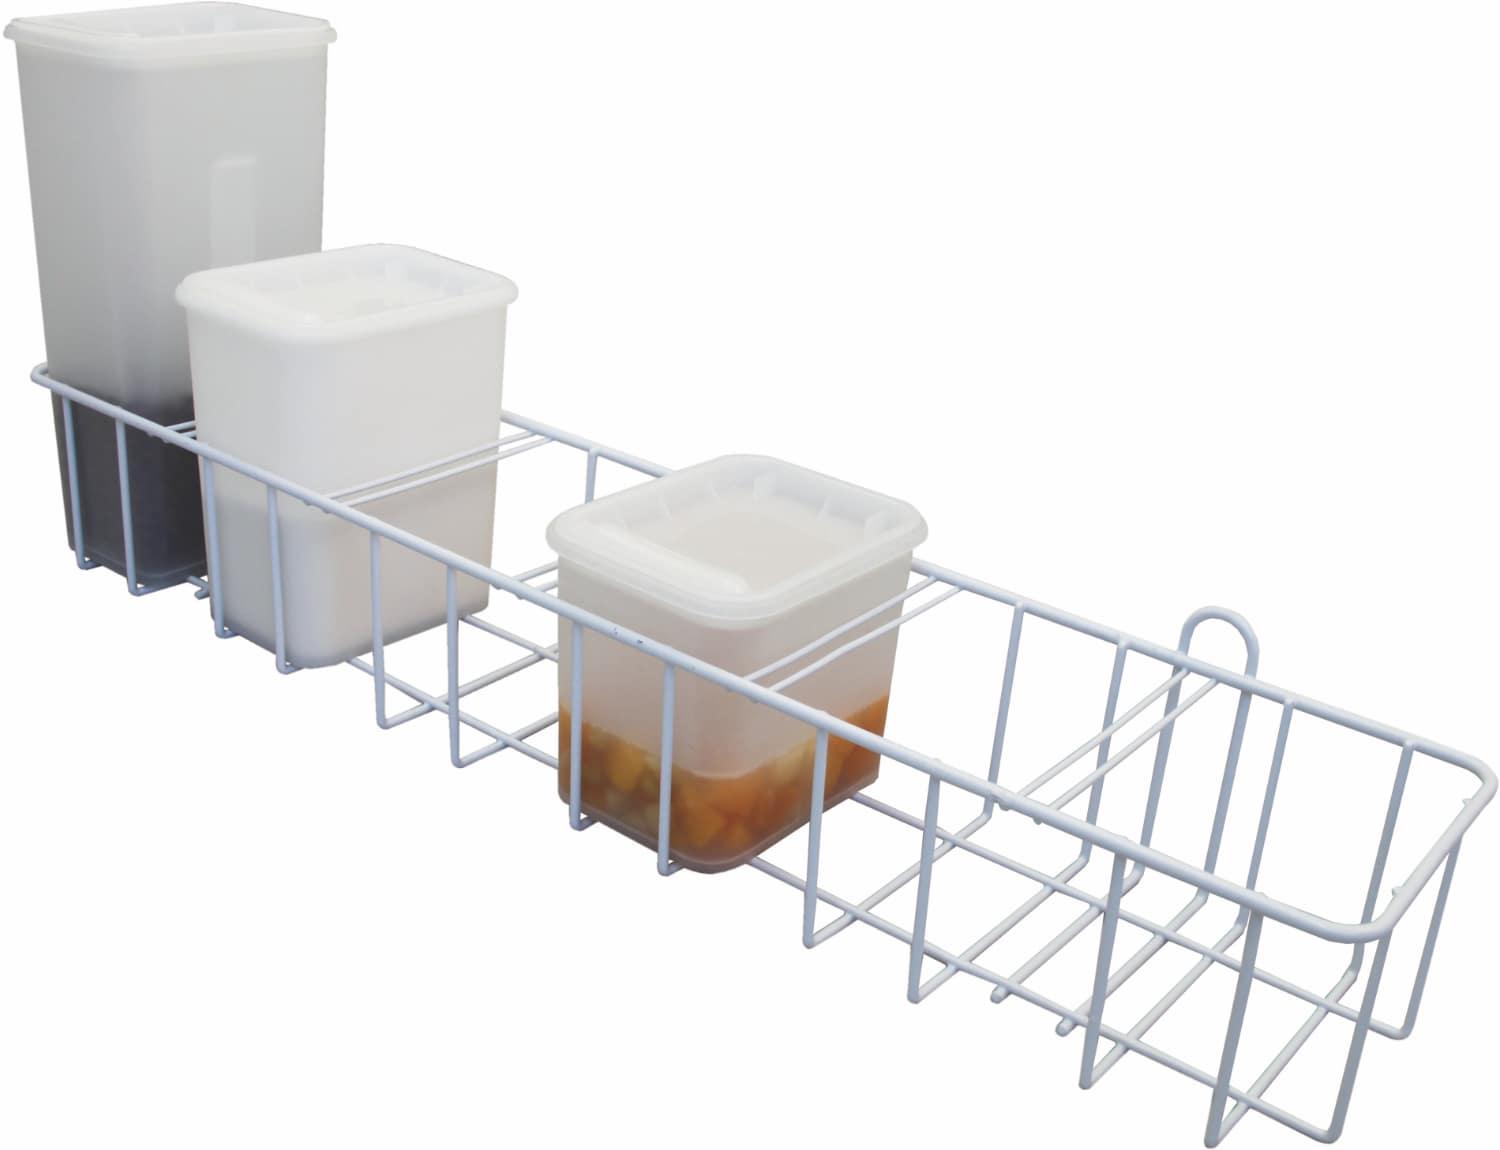 Wall rack for plastic containers 